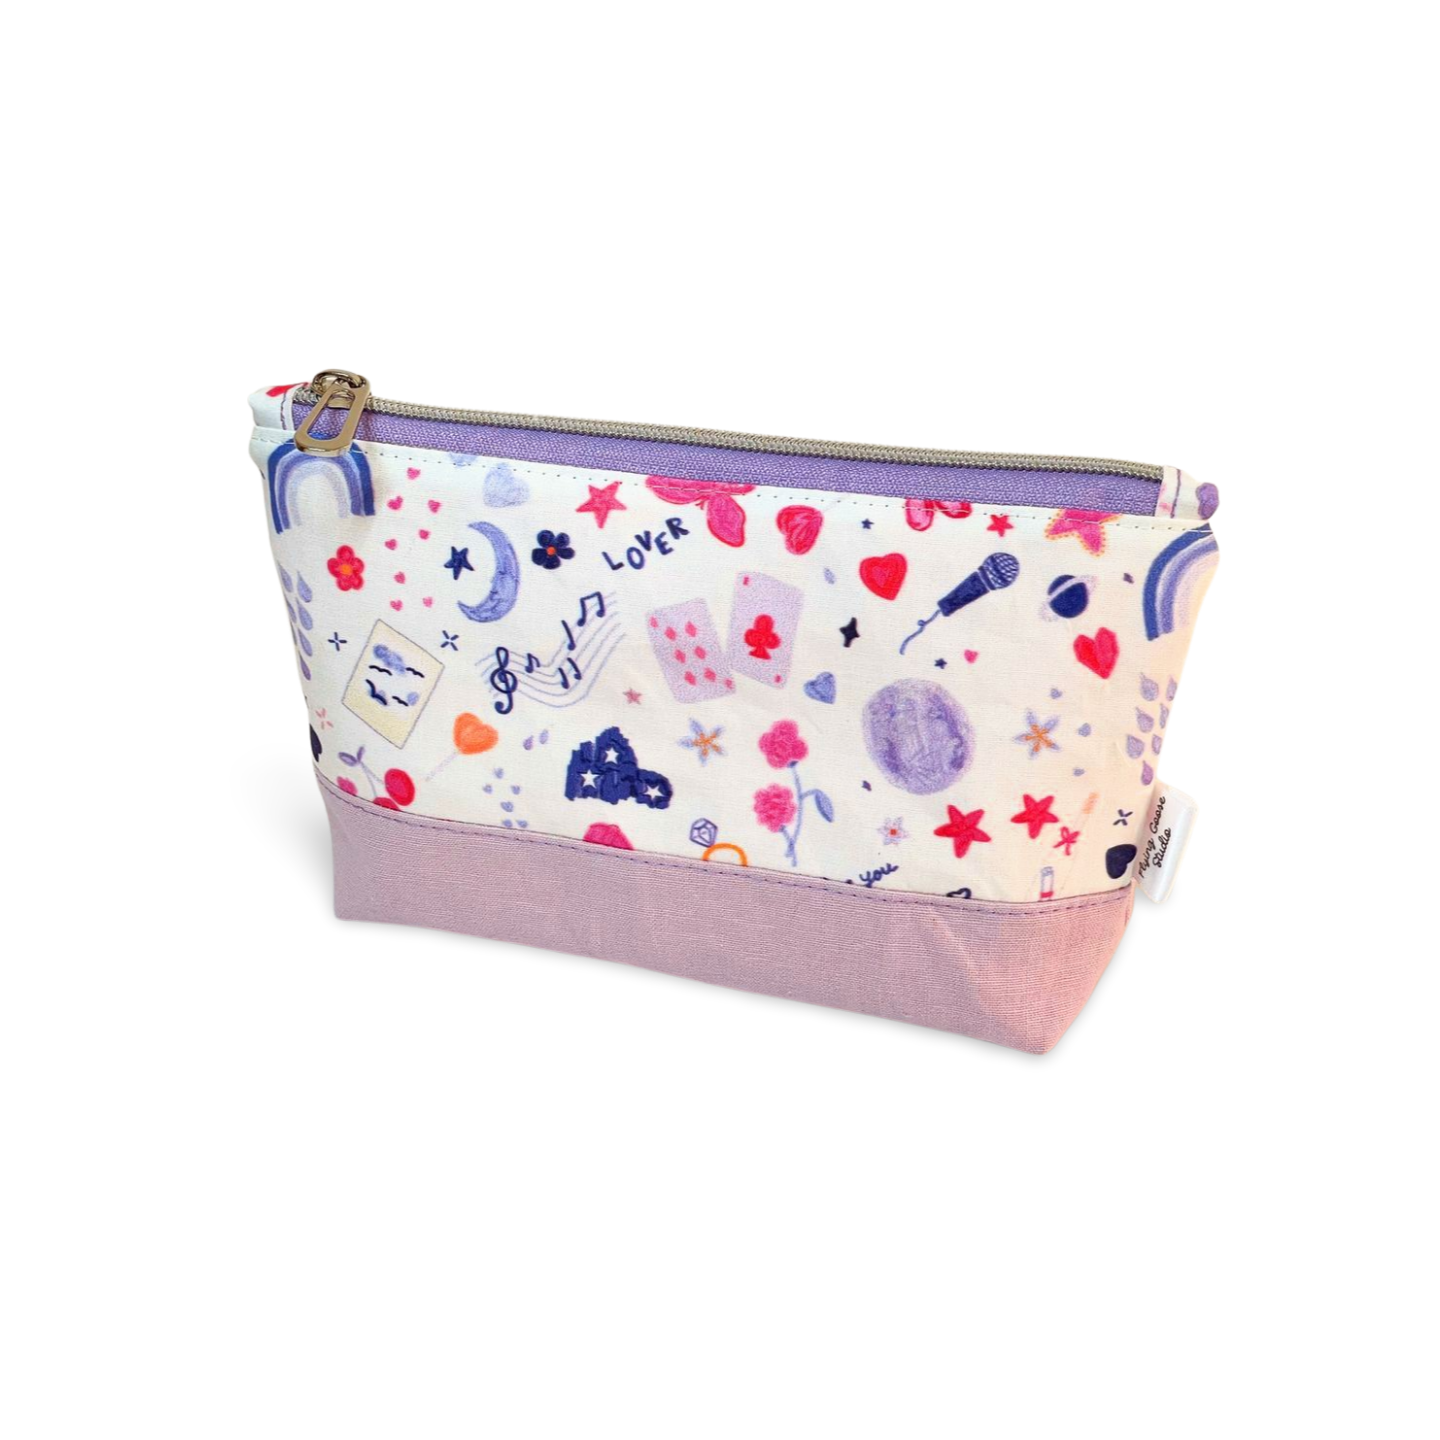 Taylor Swift 'Lover' Inspired Zipper Pouch (Thistle)